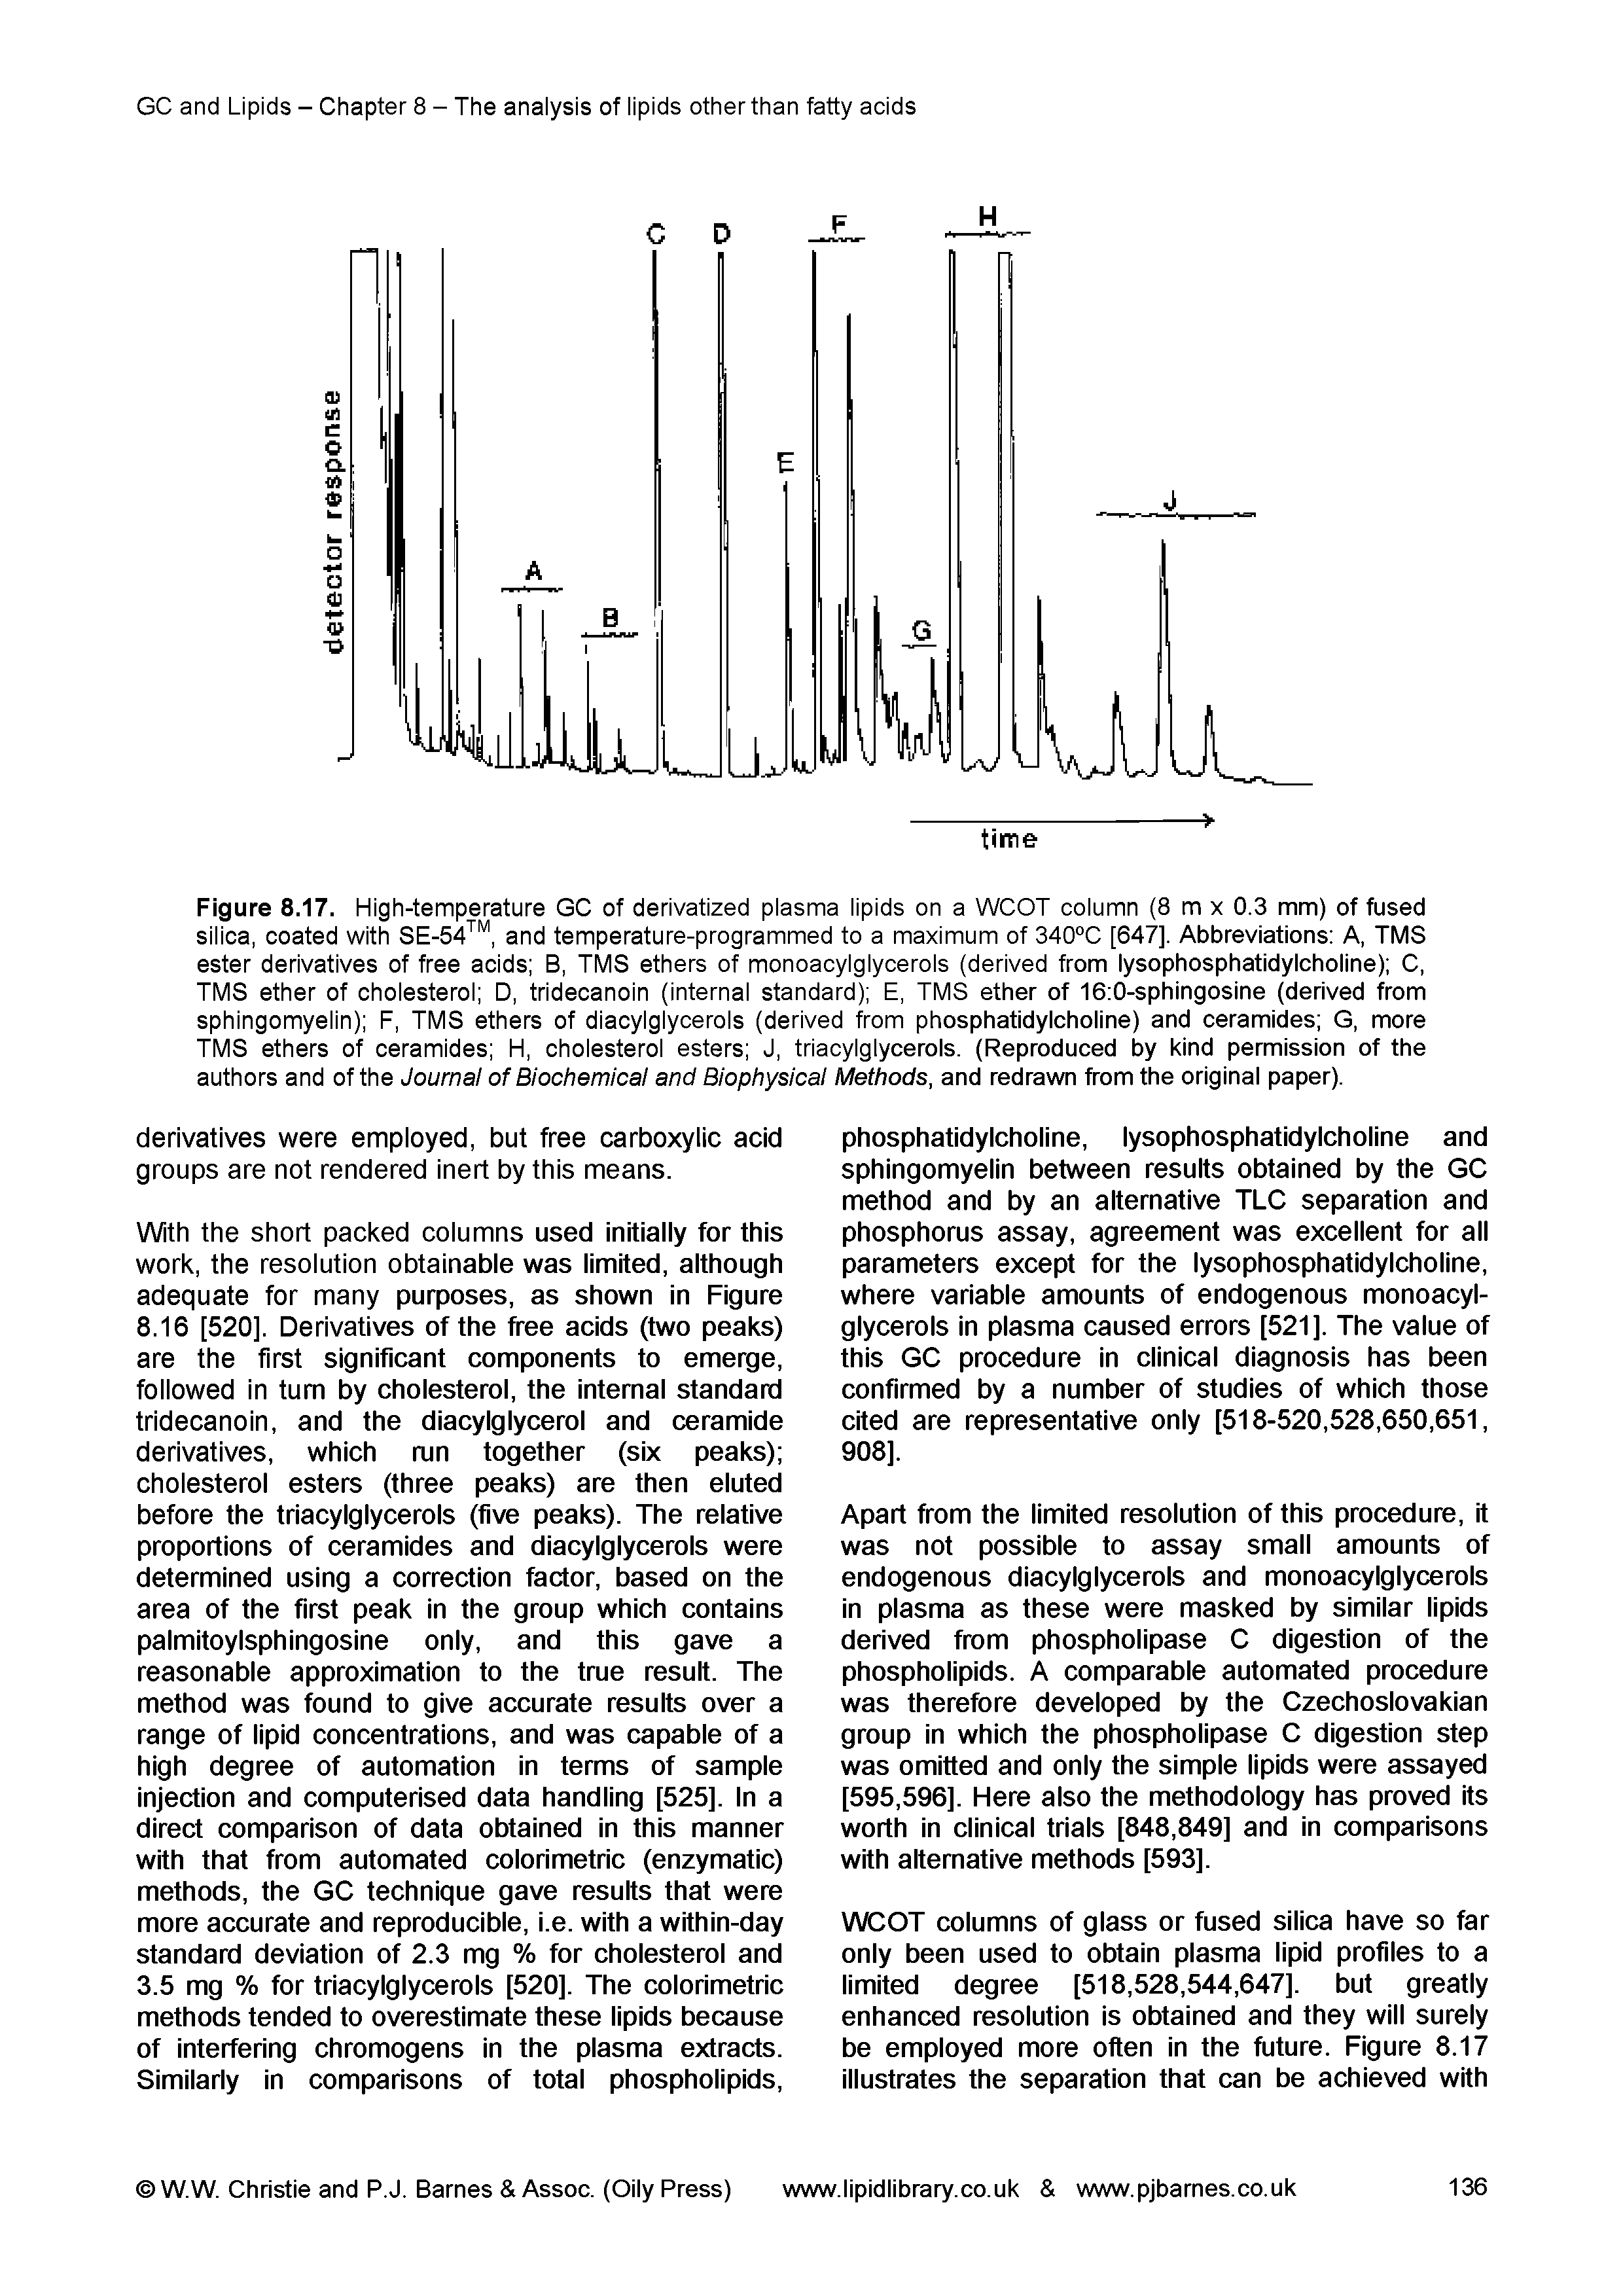 Figure 8.17. High-temperature GC of derivatized plasma lipids on a WCOT column (8 m x 0.3 mm) of fused silica, coated with SE-54, and temperature-programmed to a maximum of 340 C [647]. Abbreviations A, TMS ester derivatives of free acids B, TMS ethers of monoacylglycerols (derived from lysophosphatidylcholine) C, TMS ether of cholesterol D, tridecanoin (internal standard) E, TMS ether of 16 0-sphingosine (derived from sphingomyelin) F, TMS ethers of diacylglycerols (derived from phosphatidylcholine) and ceramides G, more TMS ethers of ceramides H, cholesterol esters J, triacylglycerols. (Reproduced by kind permission of the authors and of the Journal of Biochemical and Biophysical Methods, and redrawn from the original paper).